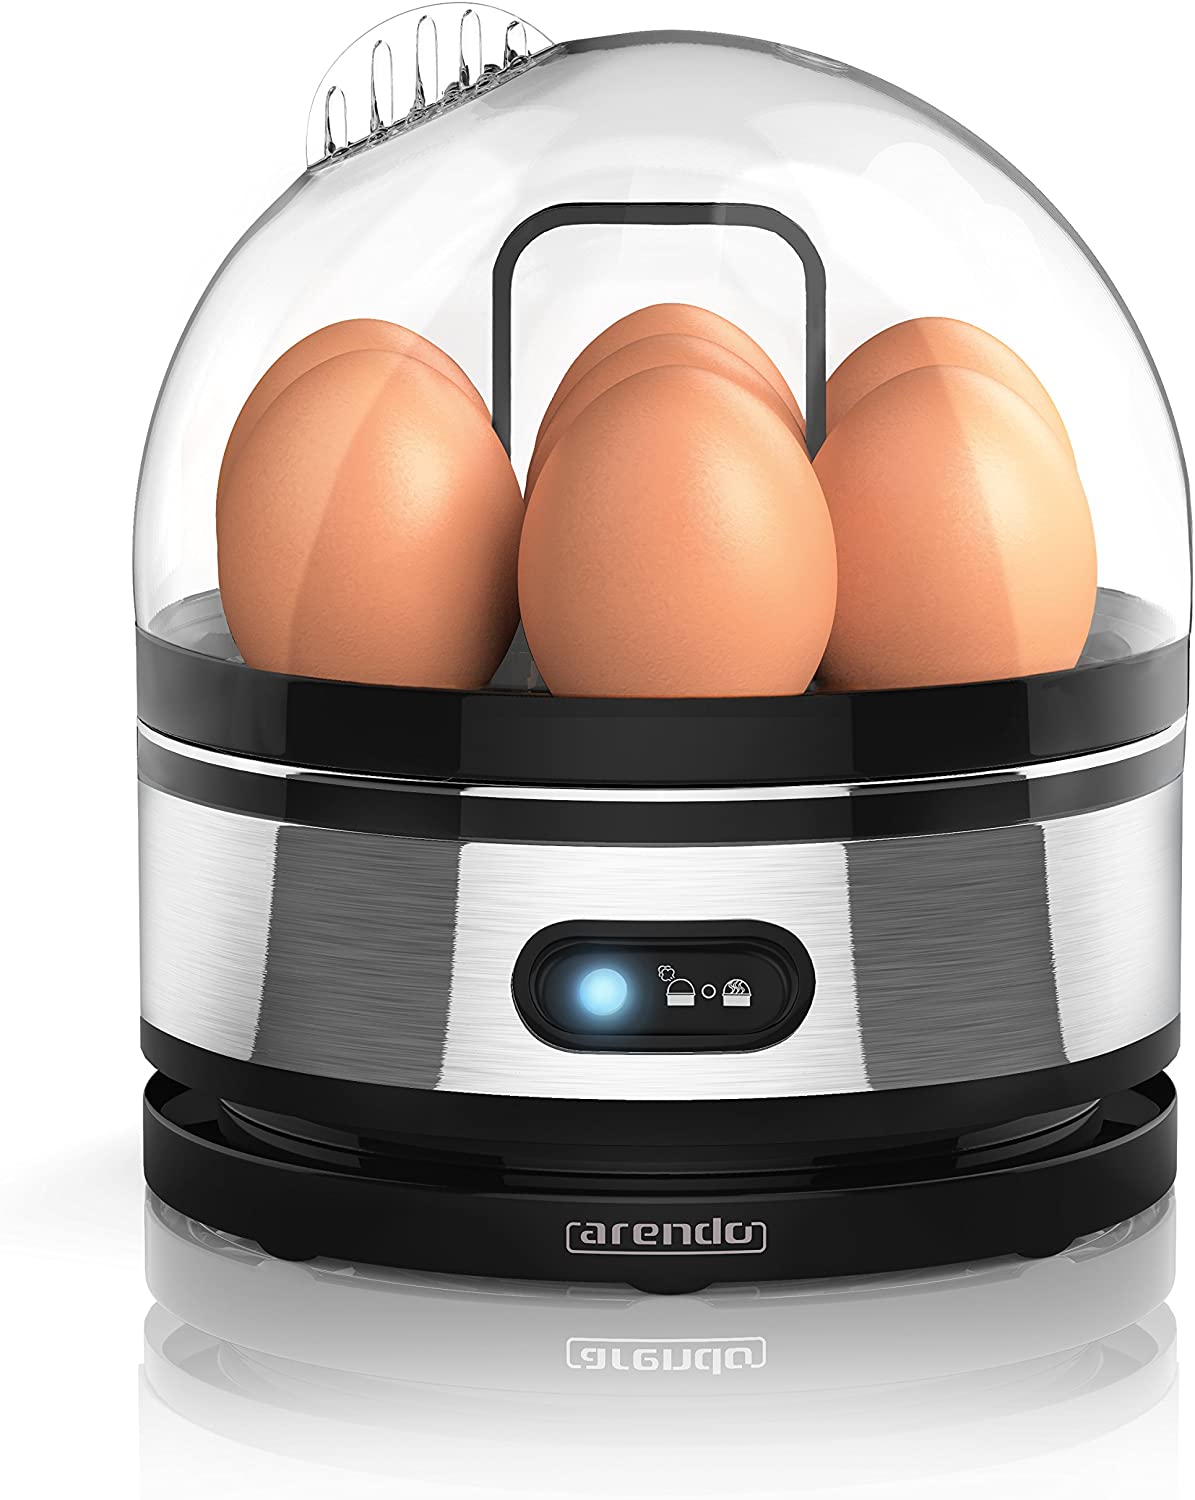 Arendo - Stainless steel egg cooker with warming function - tilt function switch with indicator light - adjustable hardness level - quenching 1-7 eggs - rust-proof, brushed stainless steel